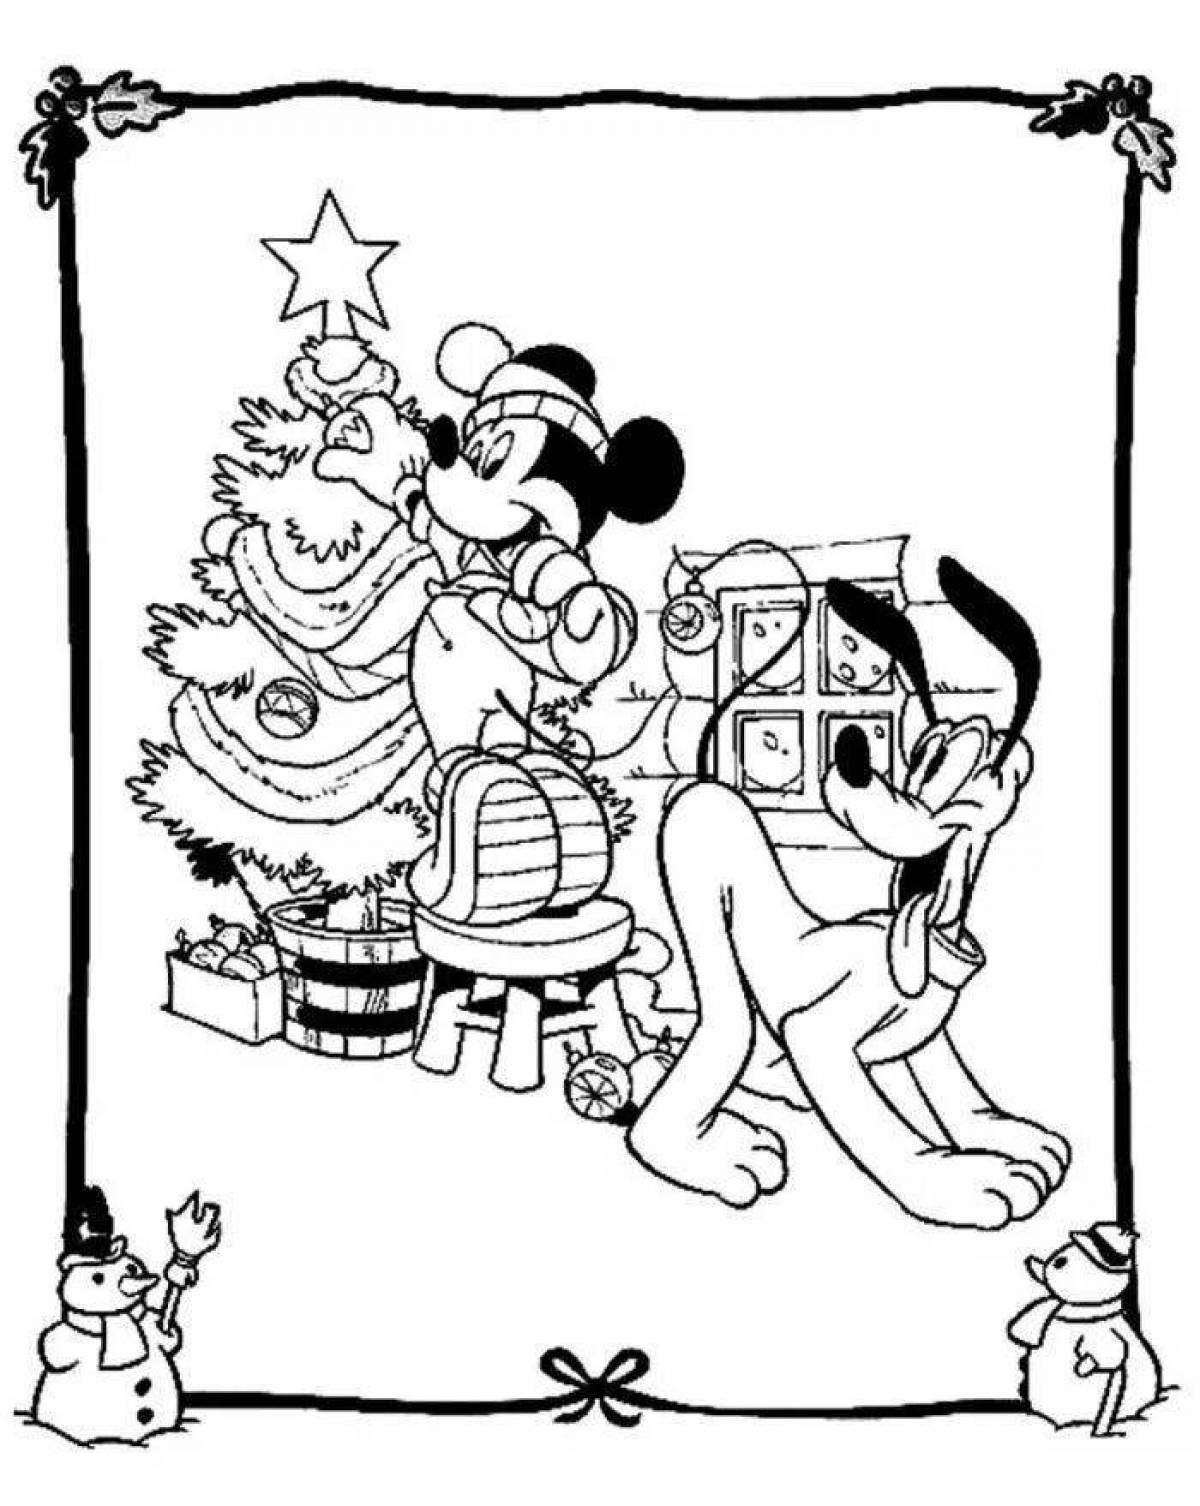 Colorful disney christmas coloring book